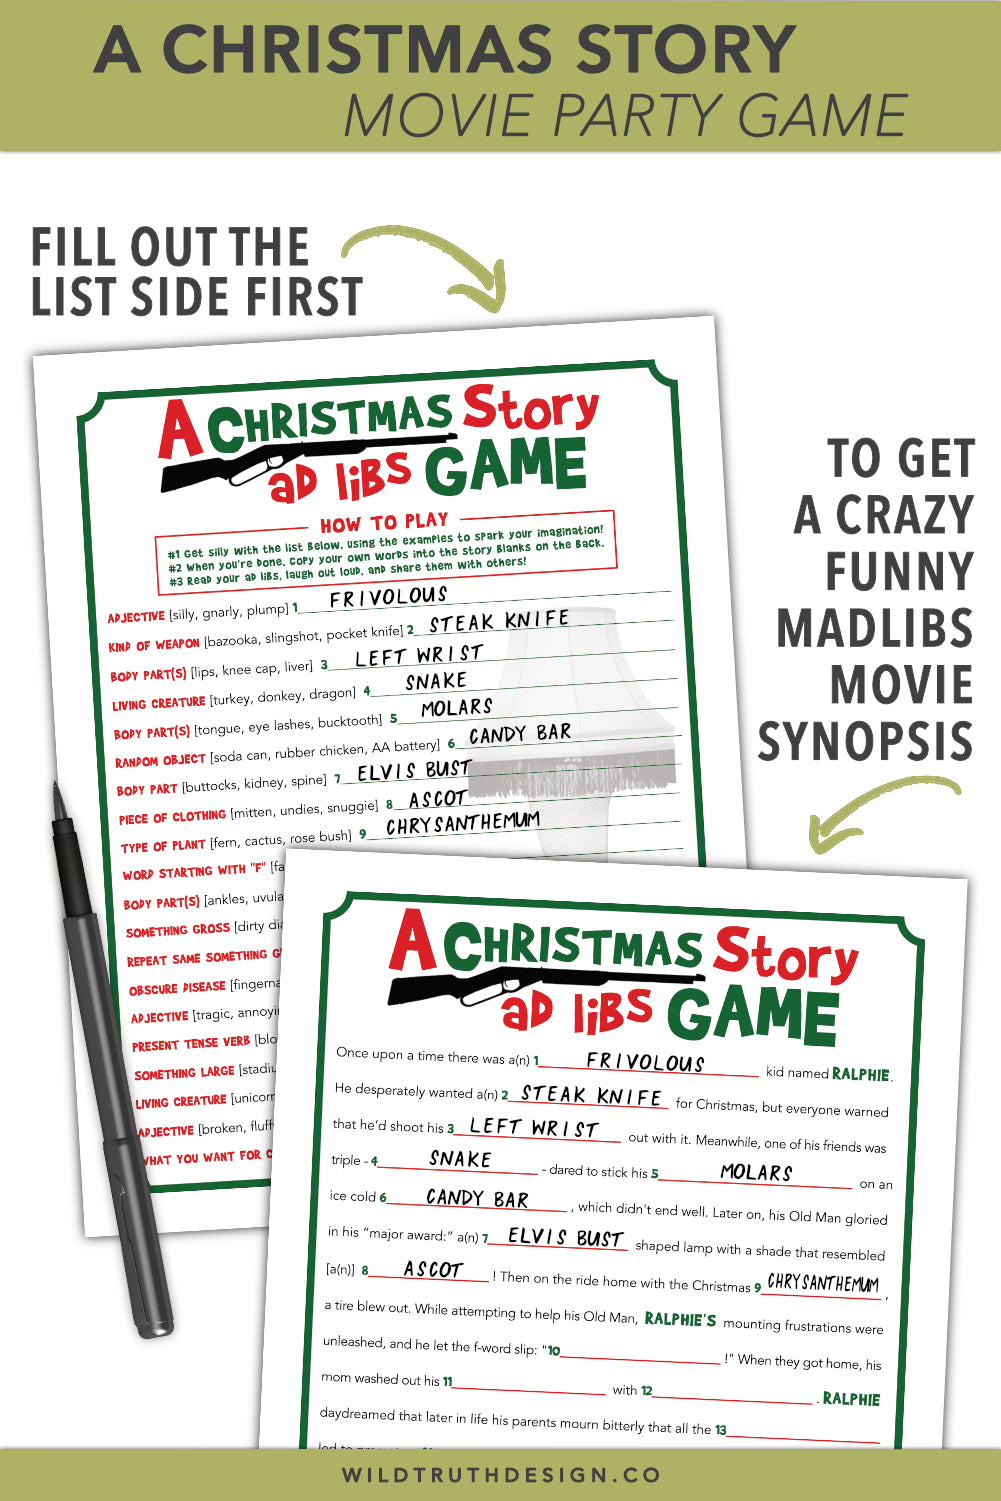 A Christmas Story Movie Party Game 